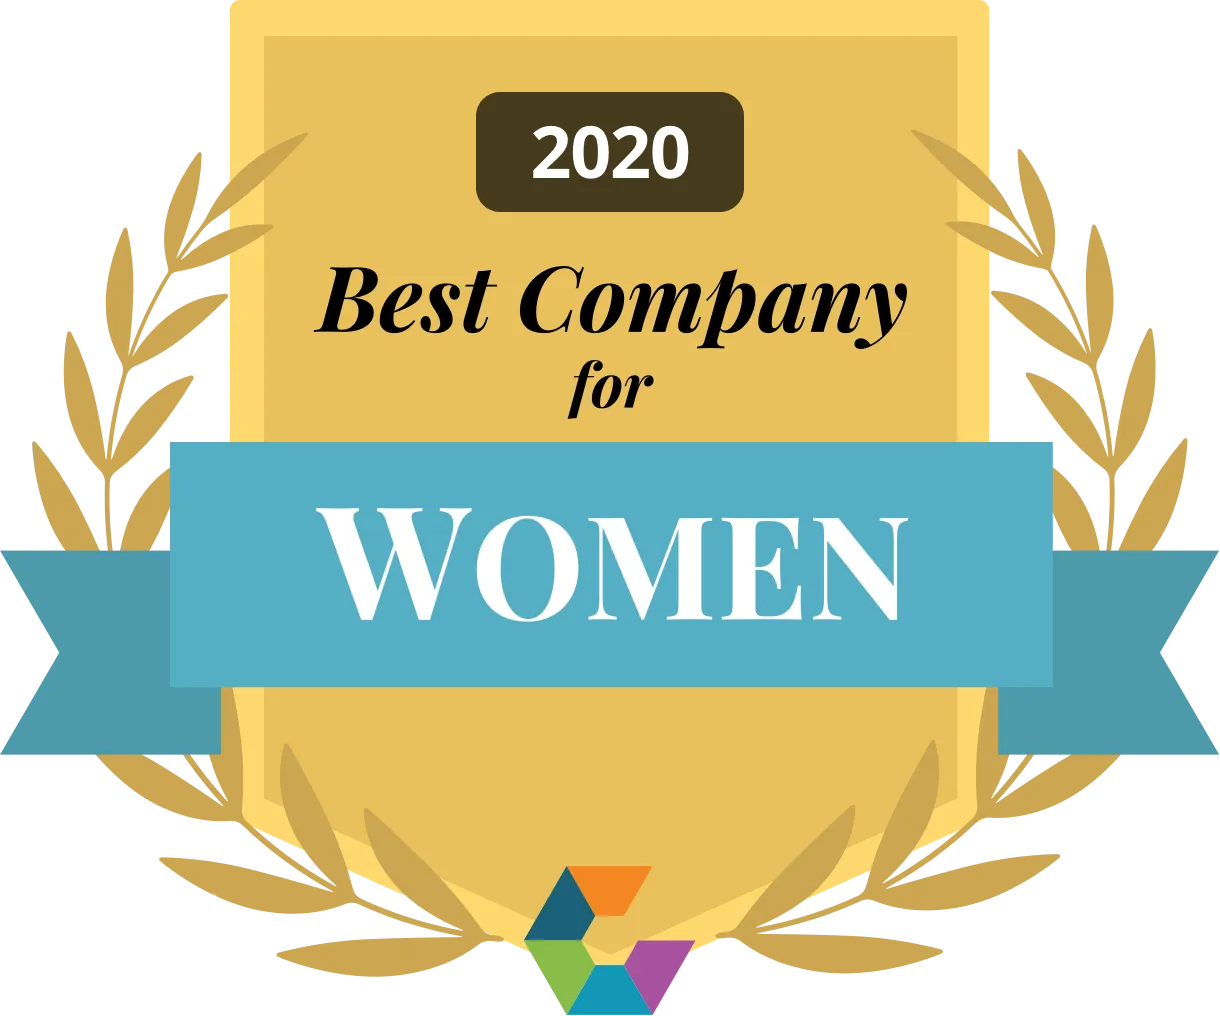 Best Company as rated by Female Employees